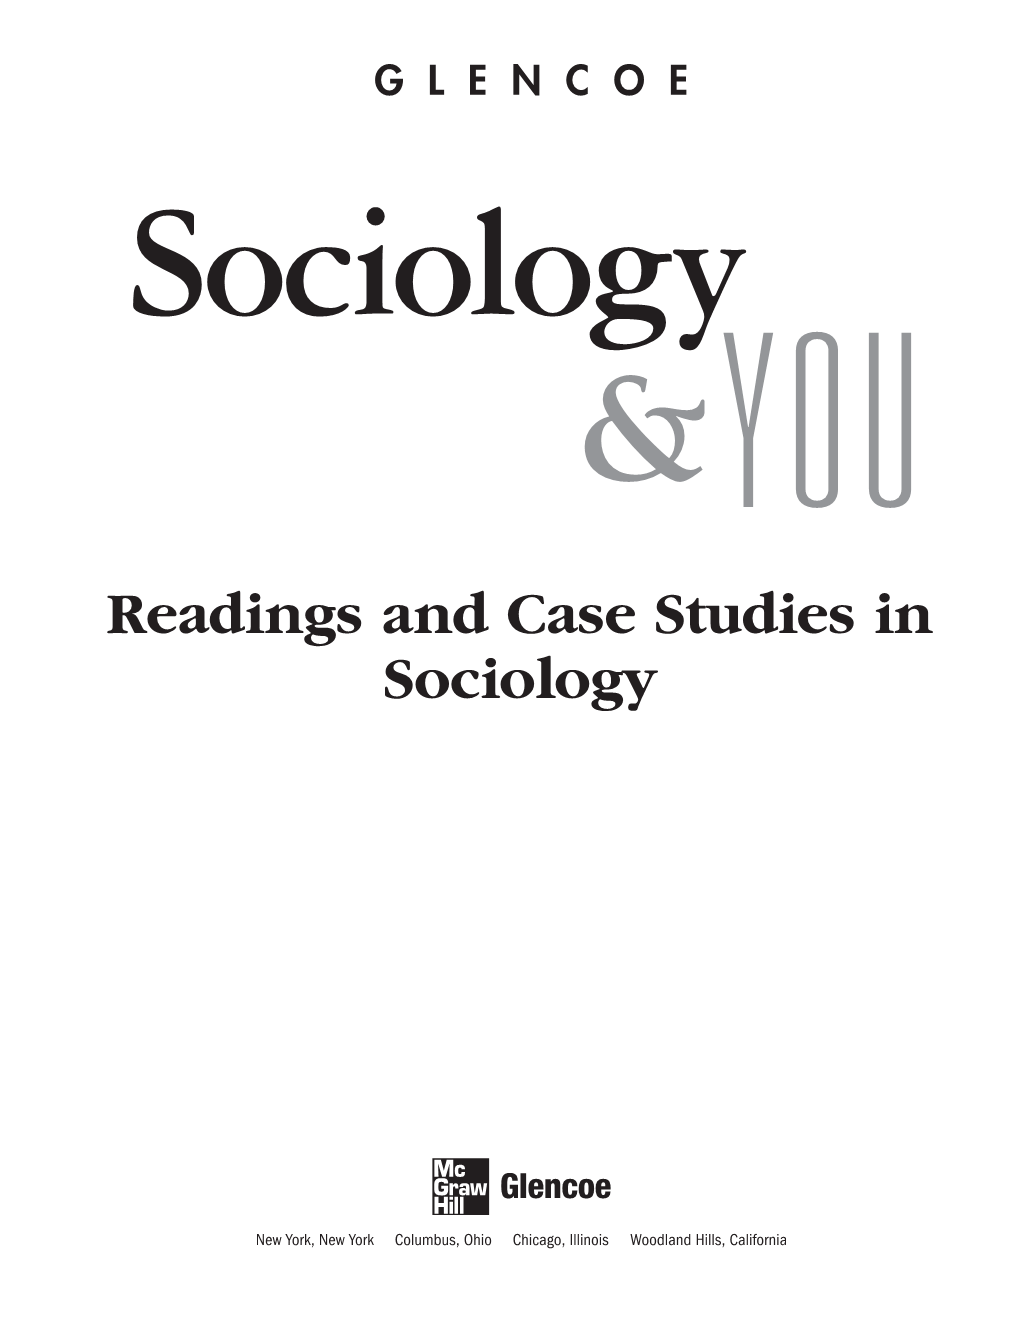 Readings and Case Studies in Sociology Copyright © by the Mcgraw-Hill Companies, Inc